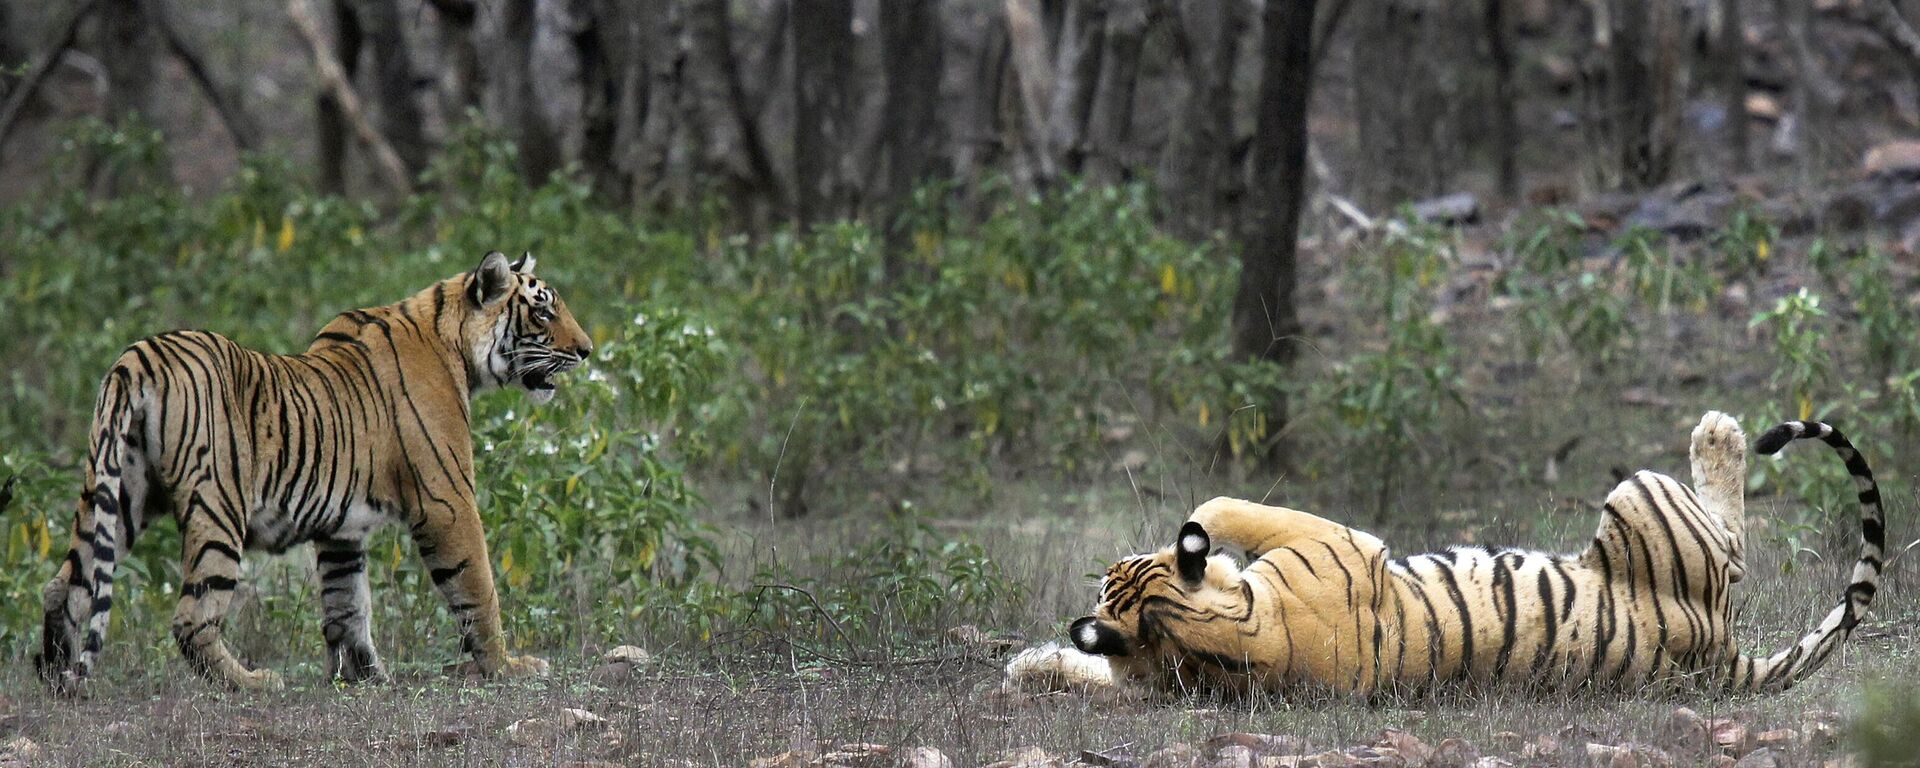 FILE - Tigers are visible at the Ranthambore National Park in Sawai Madhopur, India on April 12, 2015. India will celebrate 50 years of tiger conservation on April 9, 2023, with Modi set to announce tiger population numbers at an event in Mysuru in Karnataka.  - Sputnik भारत, 1920, 09.04.2023